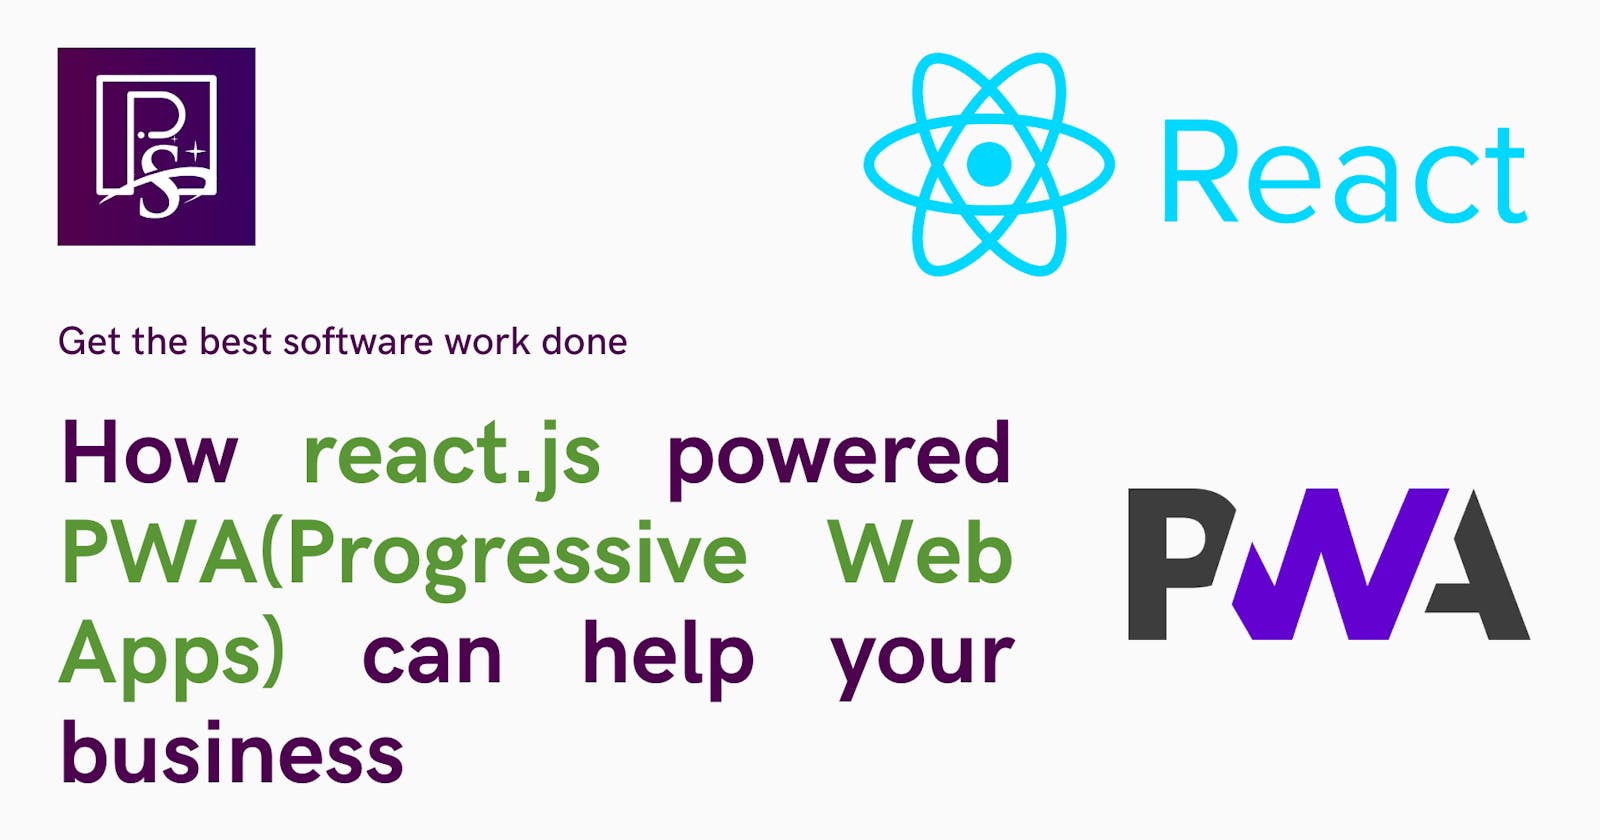 How react.js powered PWA(Progressive Web Apps) can help your business